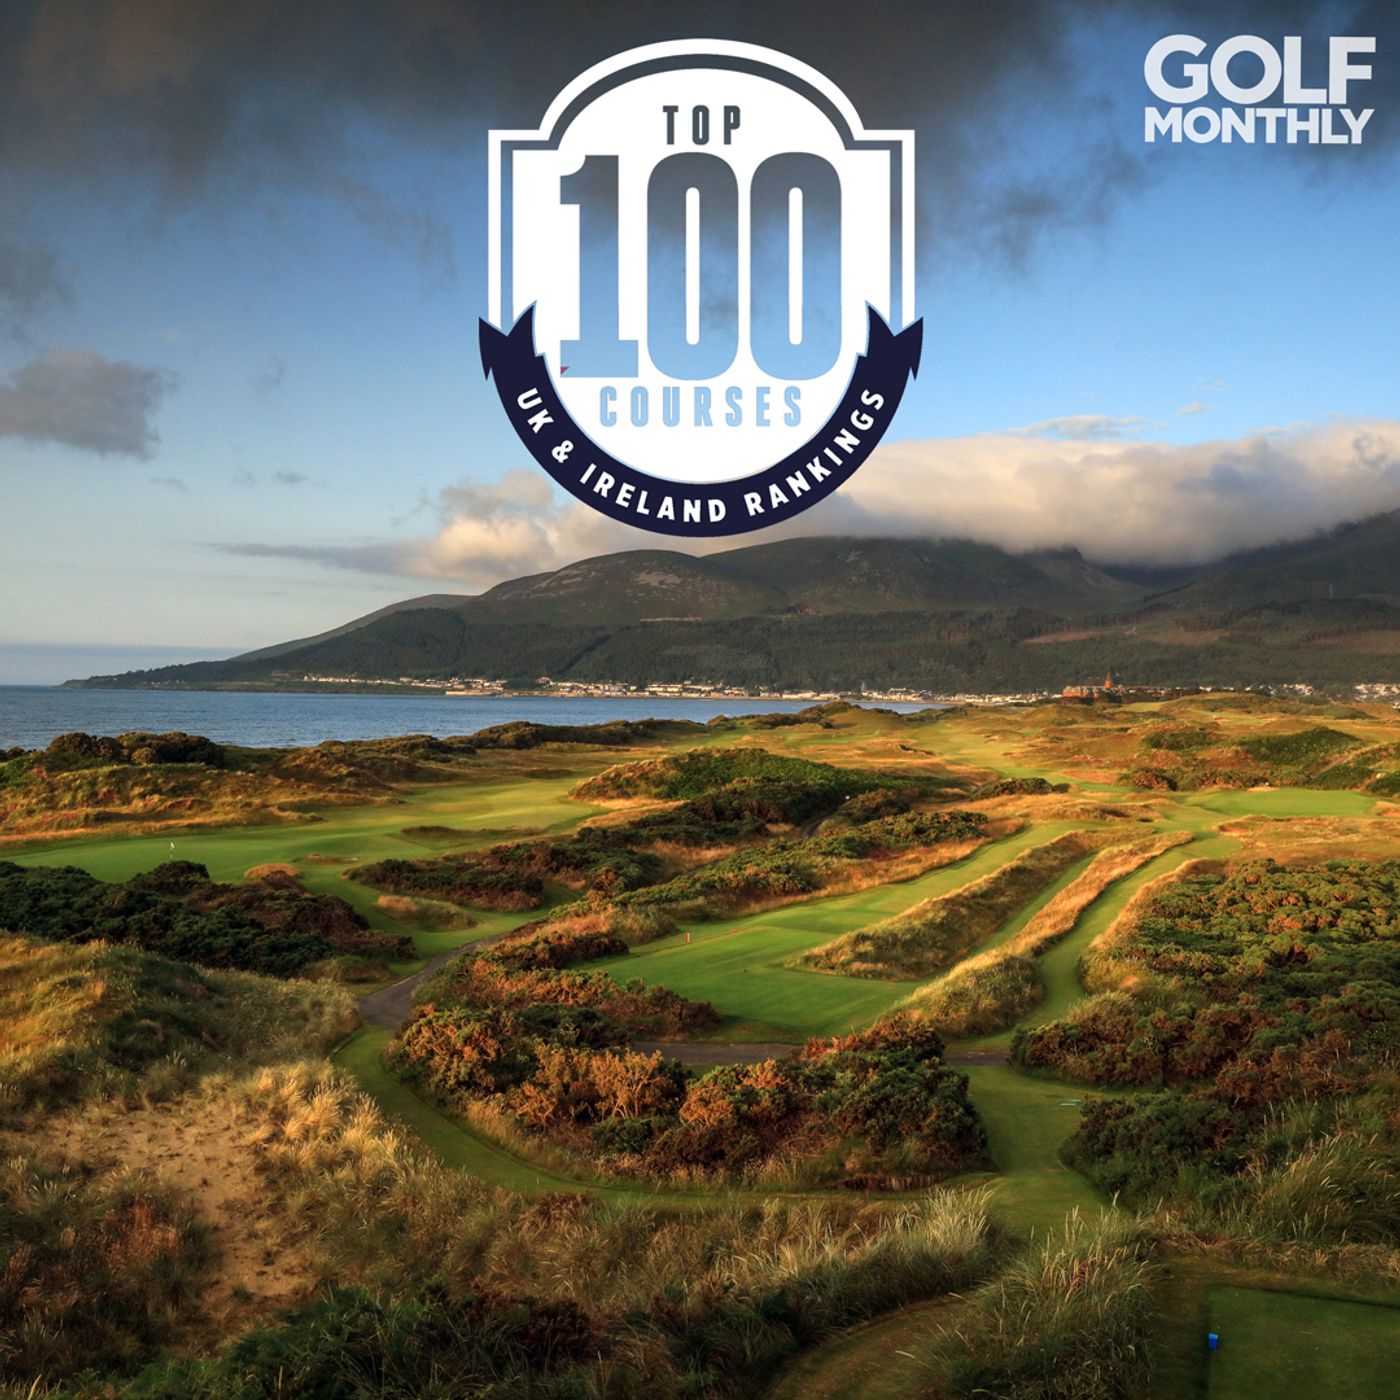 UK and Ireland's Top 100 Golf Courses